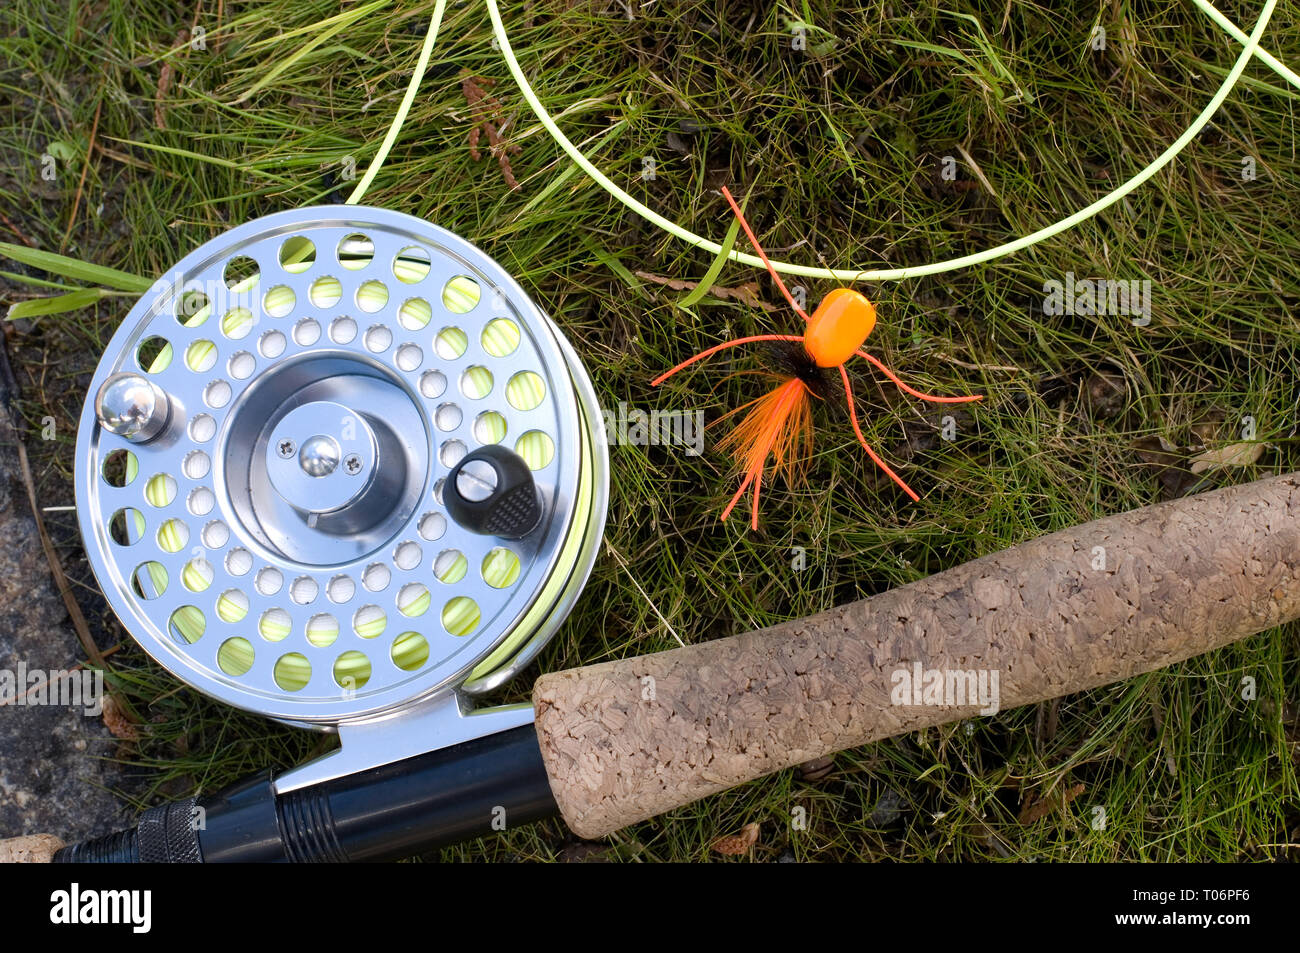 Fly fishing Rod and Reel with Orange Spider Lure on Wet Grass